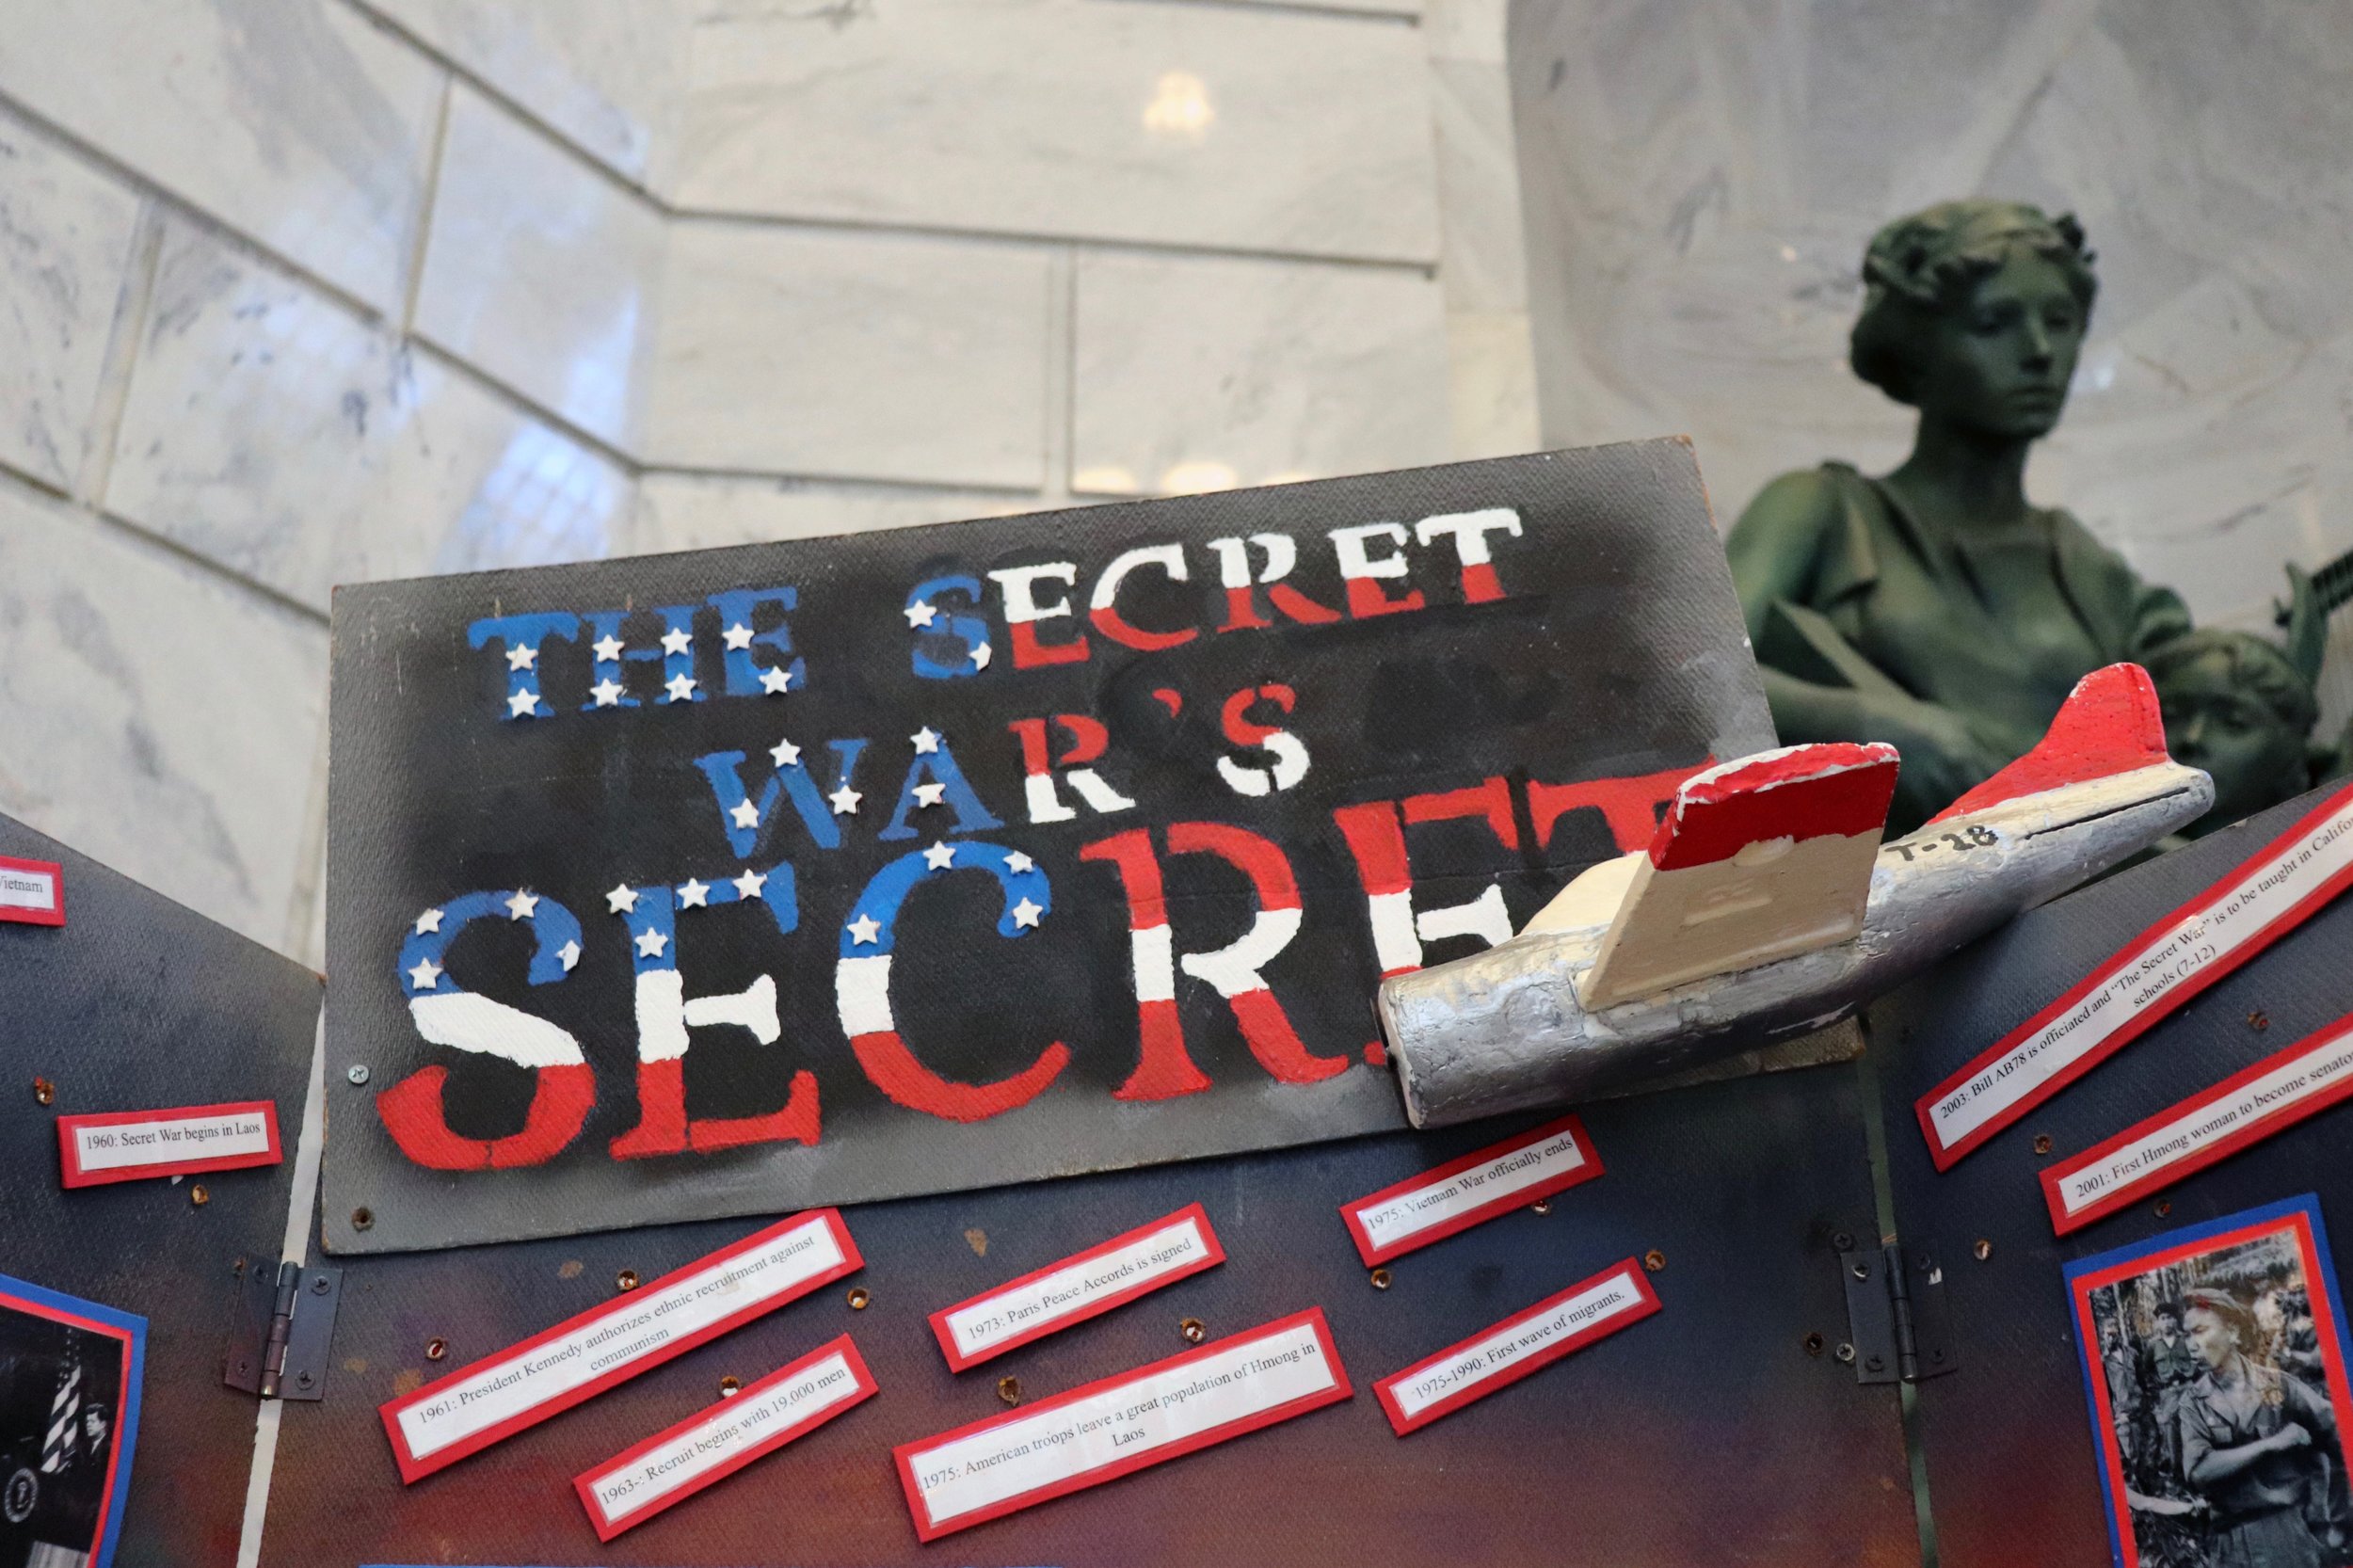 A project centered on the Laotian conflict, now referred to as “The Secret War.”